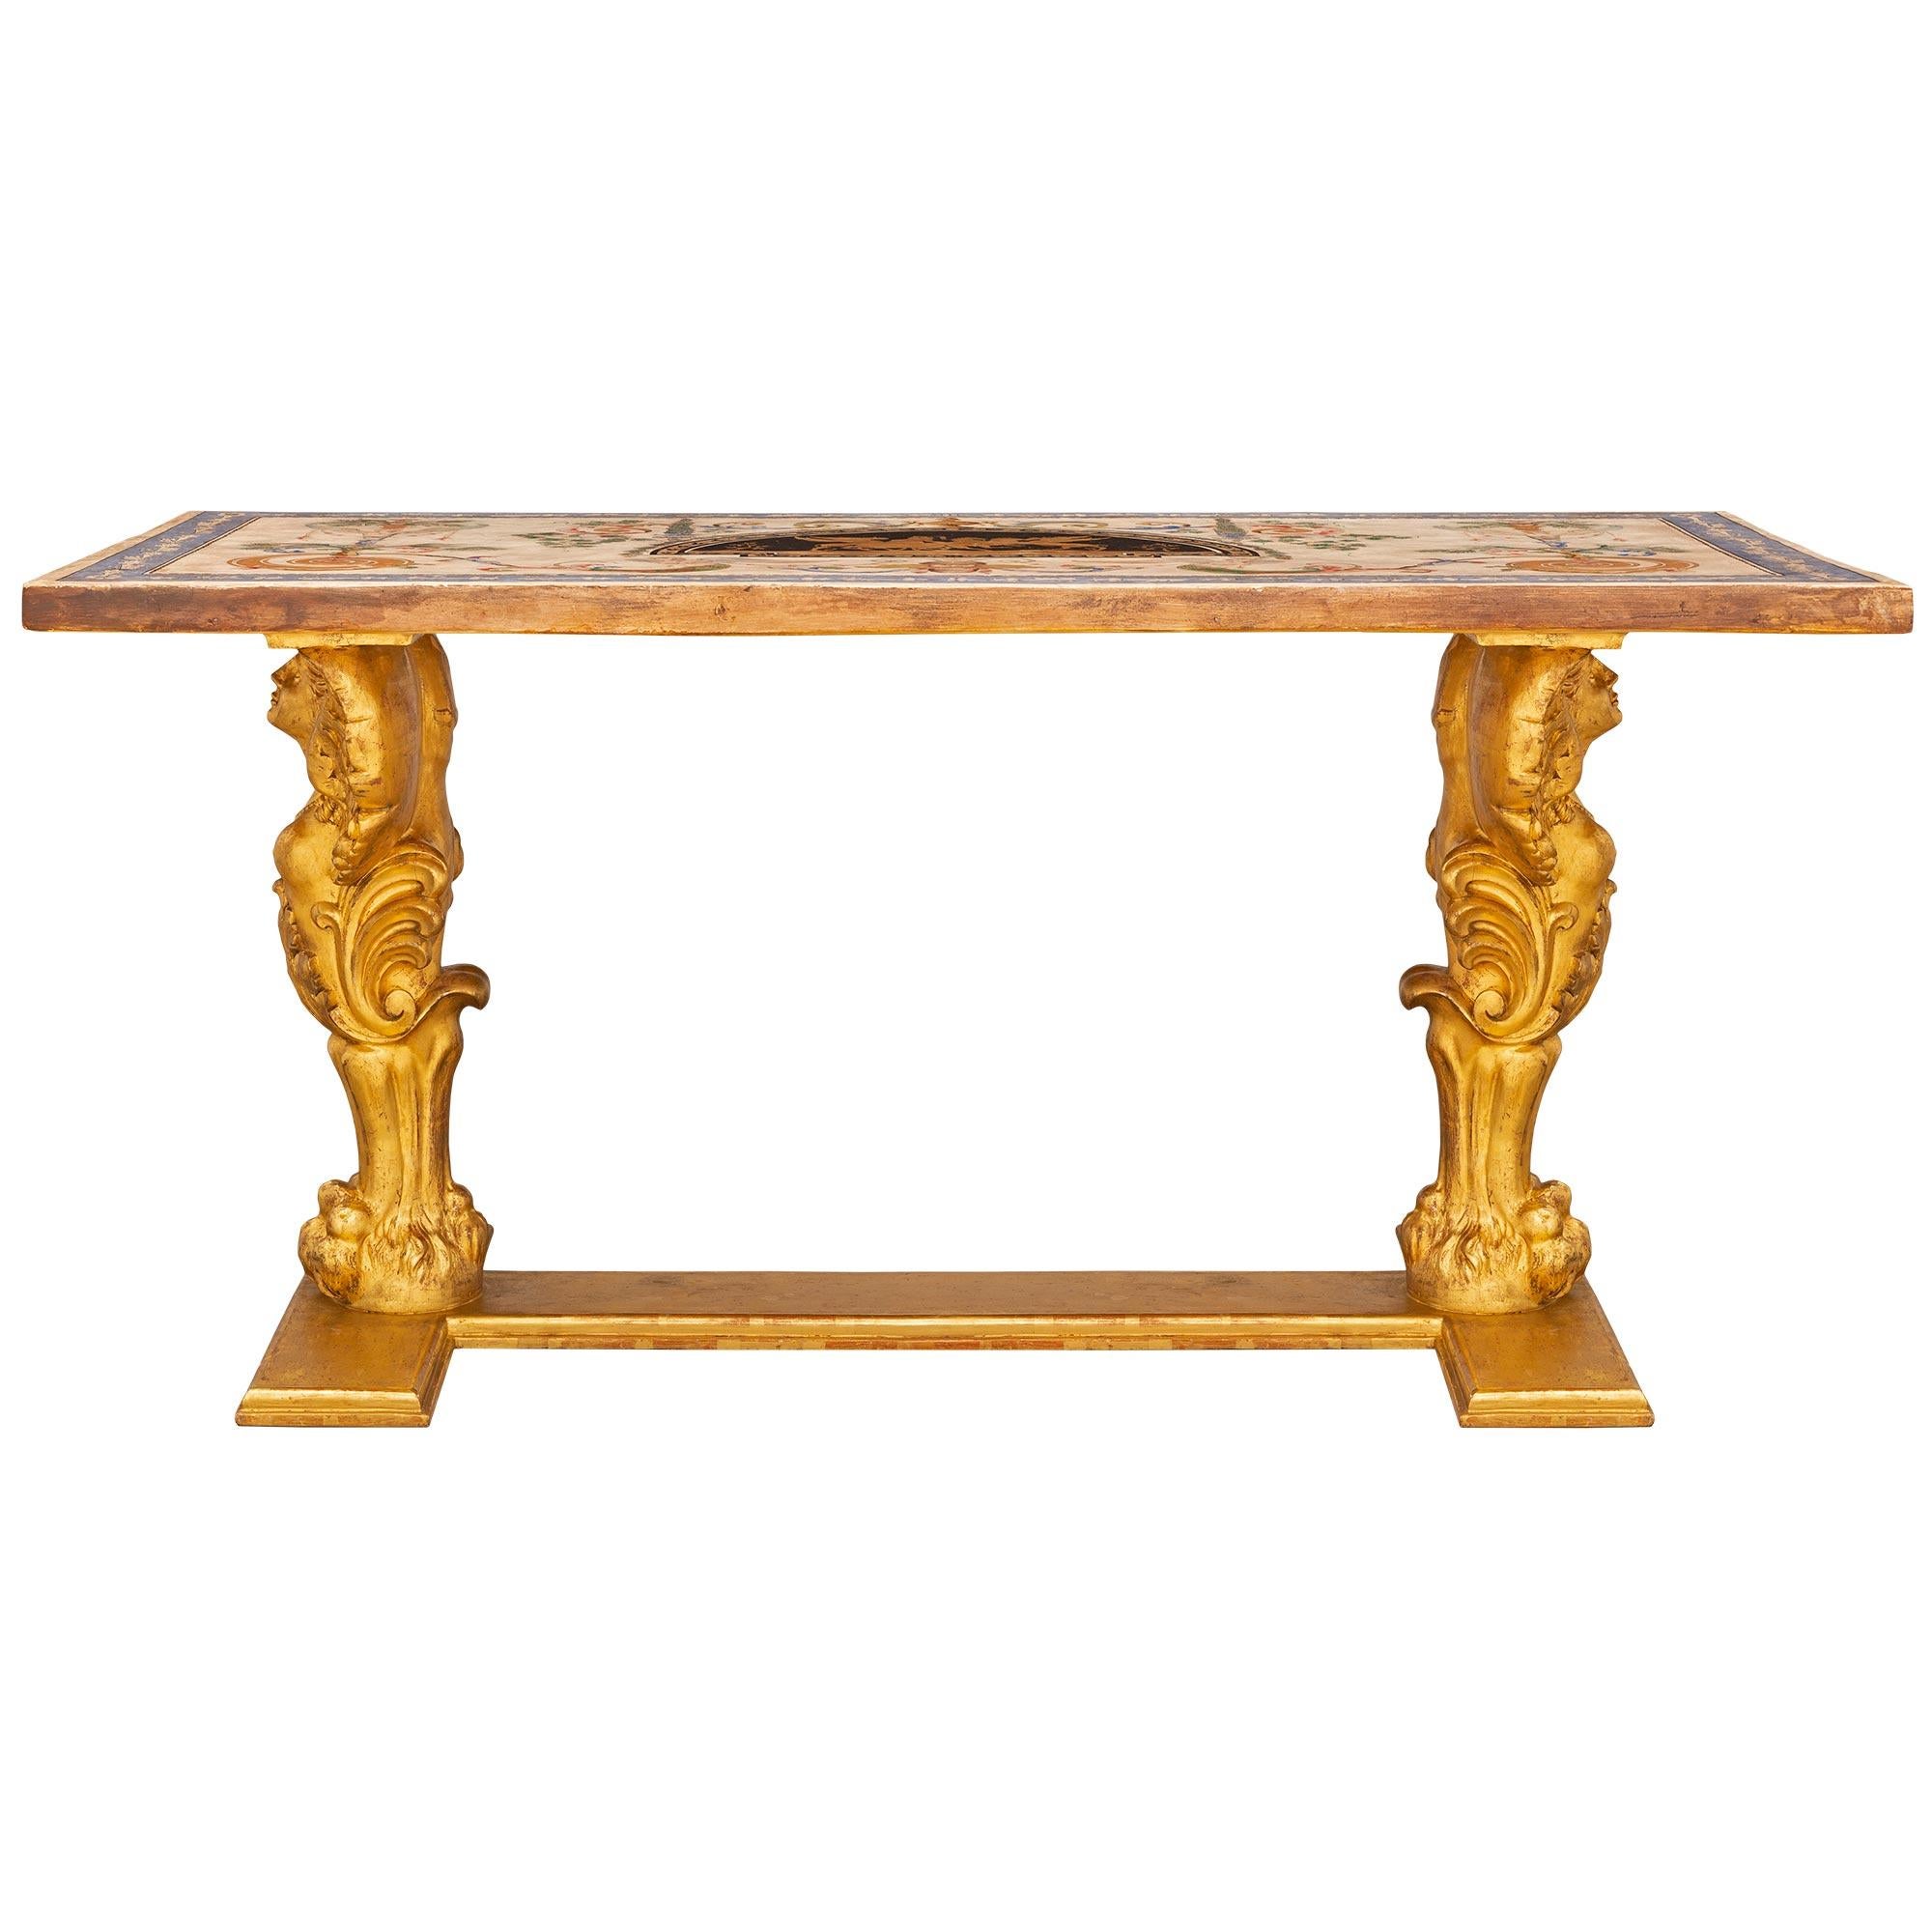 Italian Early 19th Century Neo Classical St. Cocktail or Coffee Table For Sale